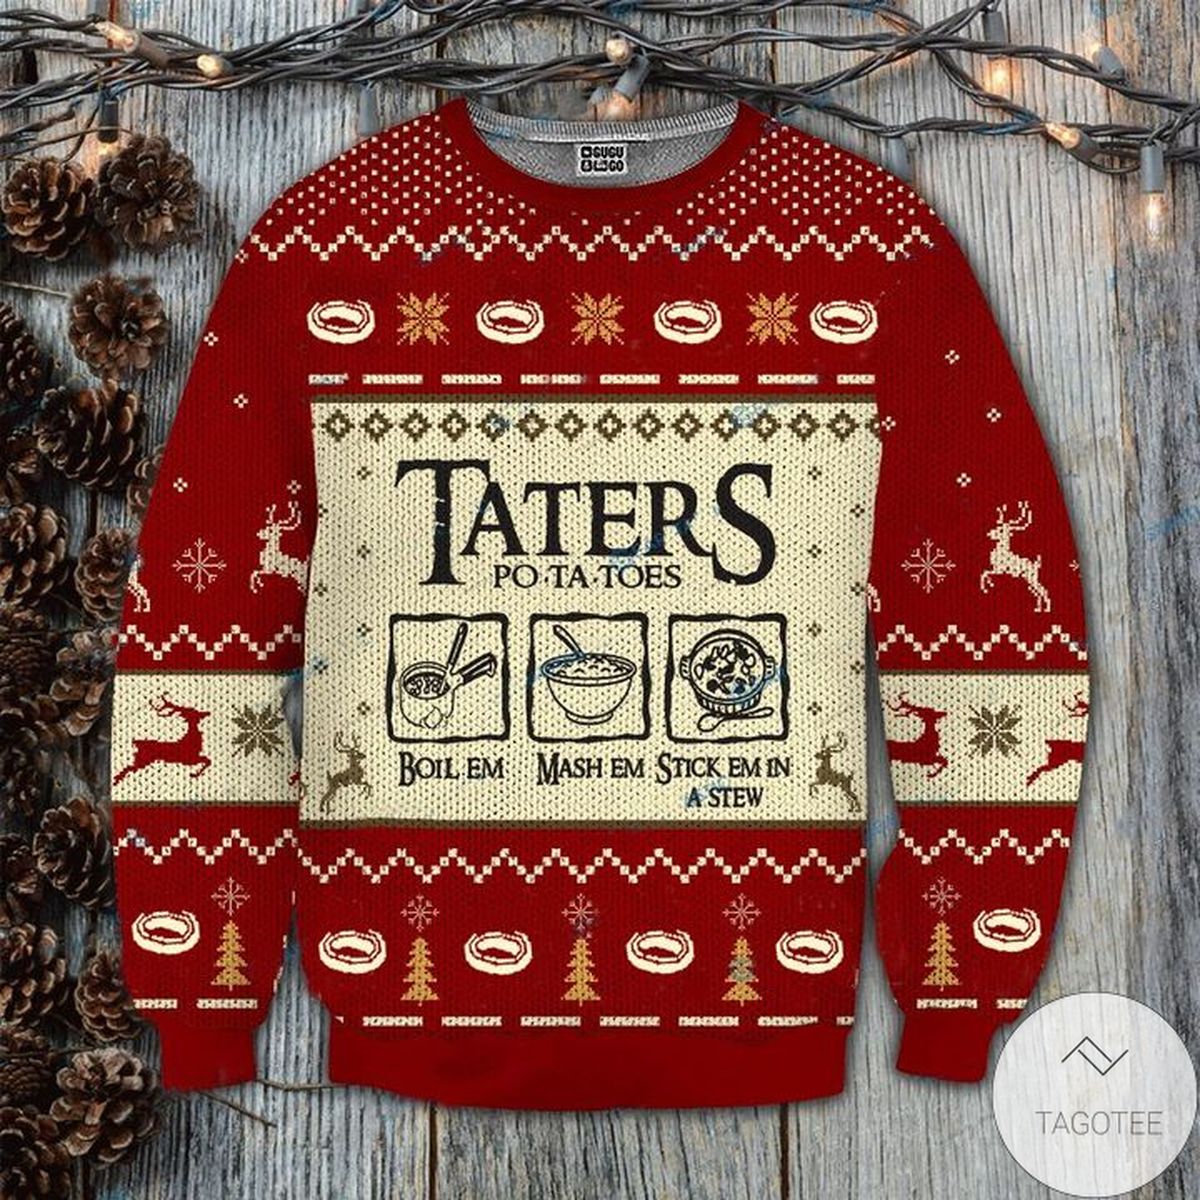 Lord Of The Rings Taters Potatoes Red Ugly Christmas Sweater